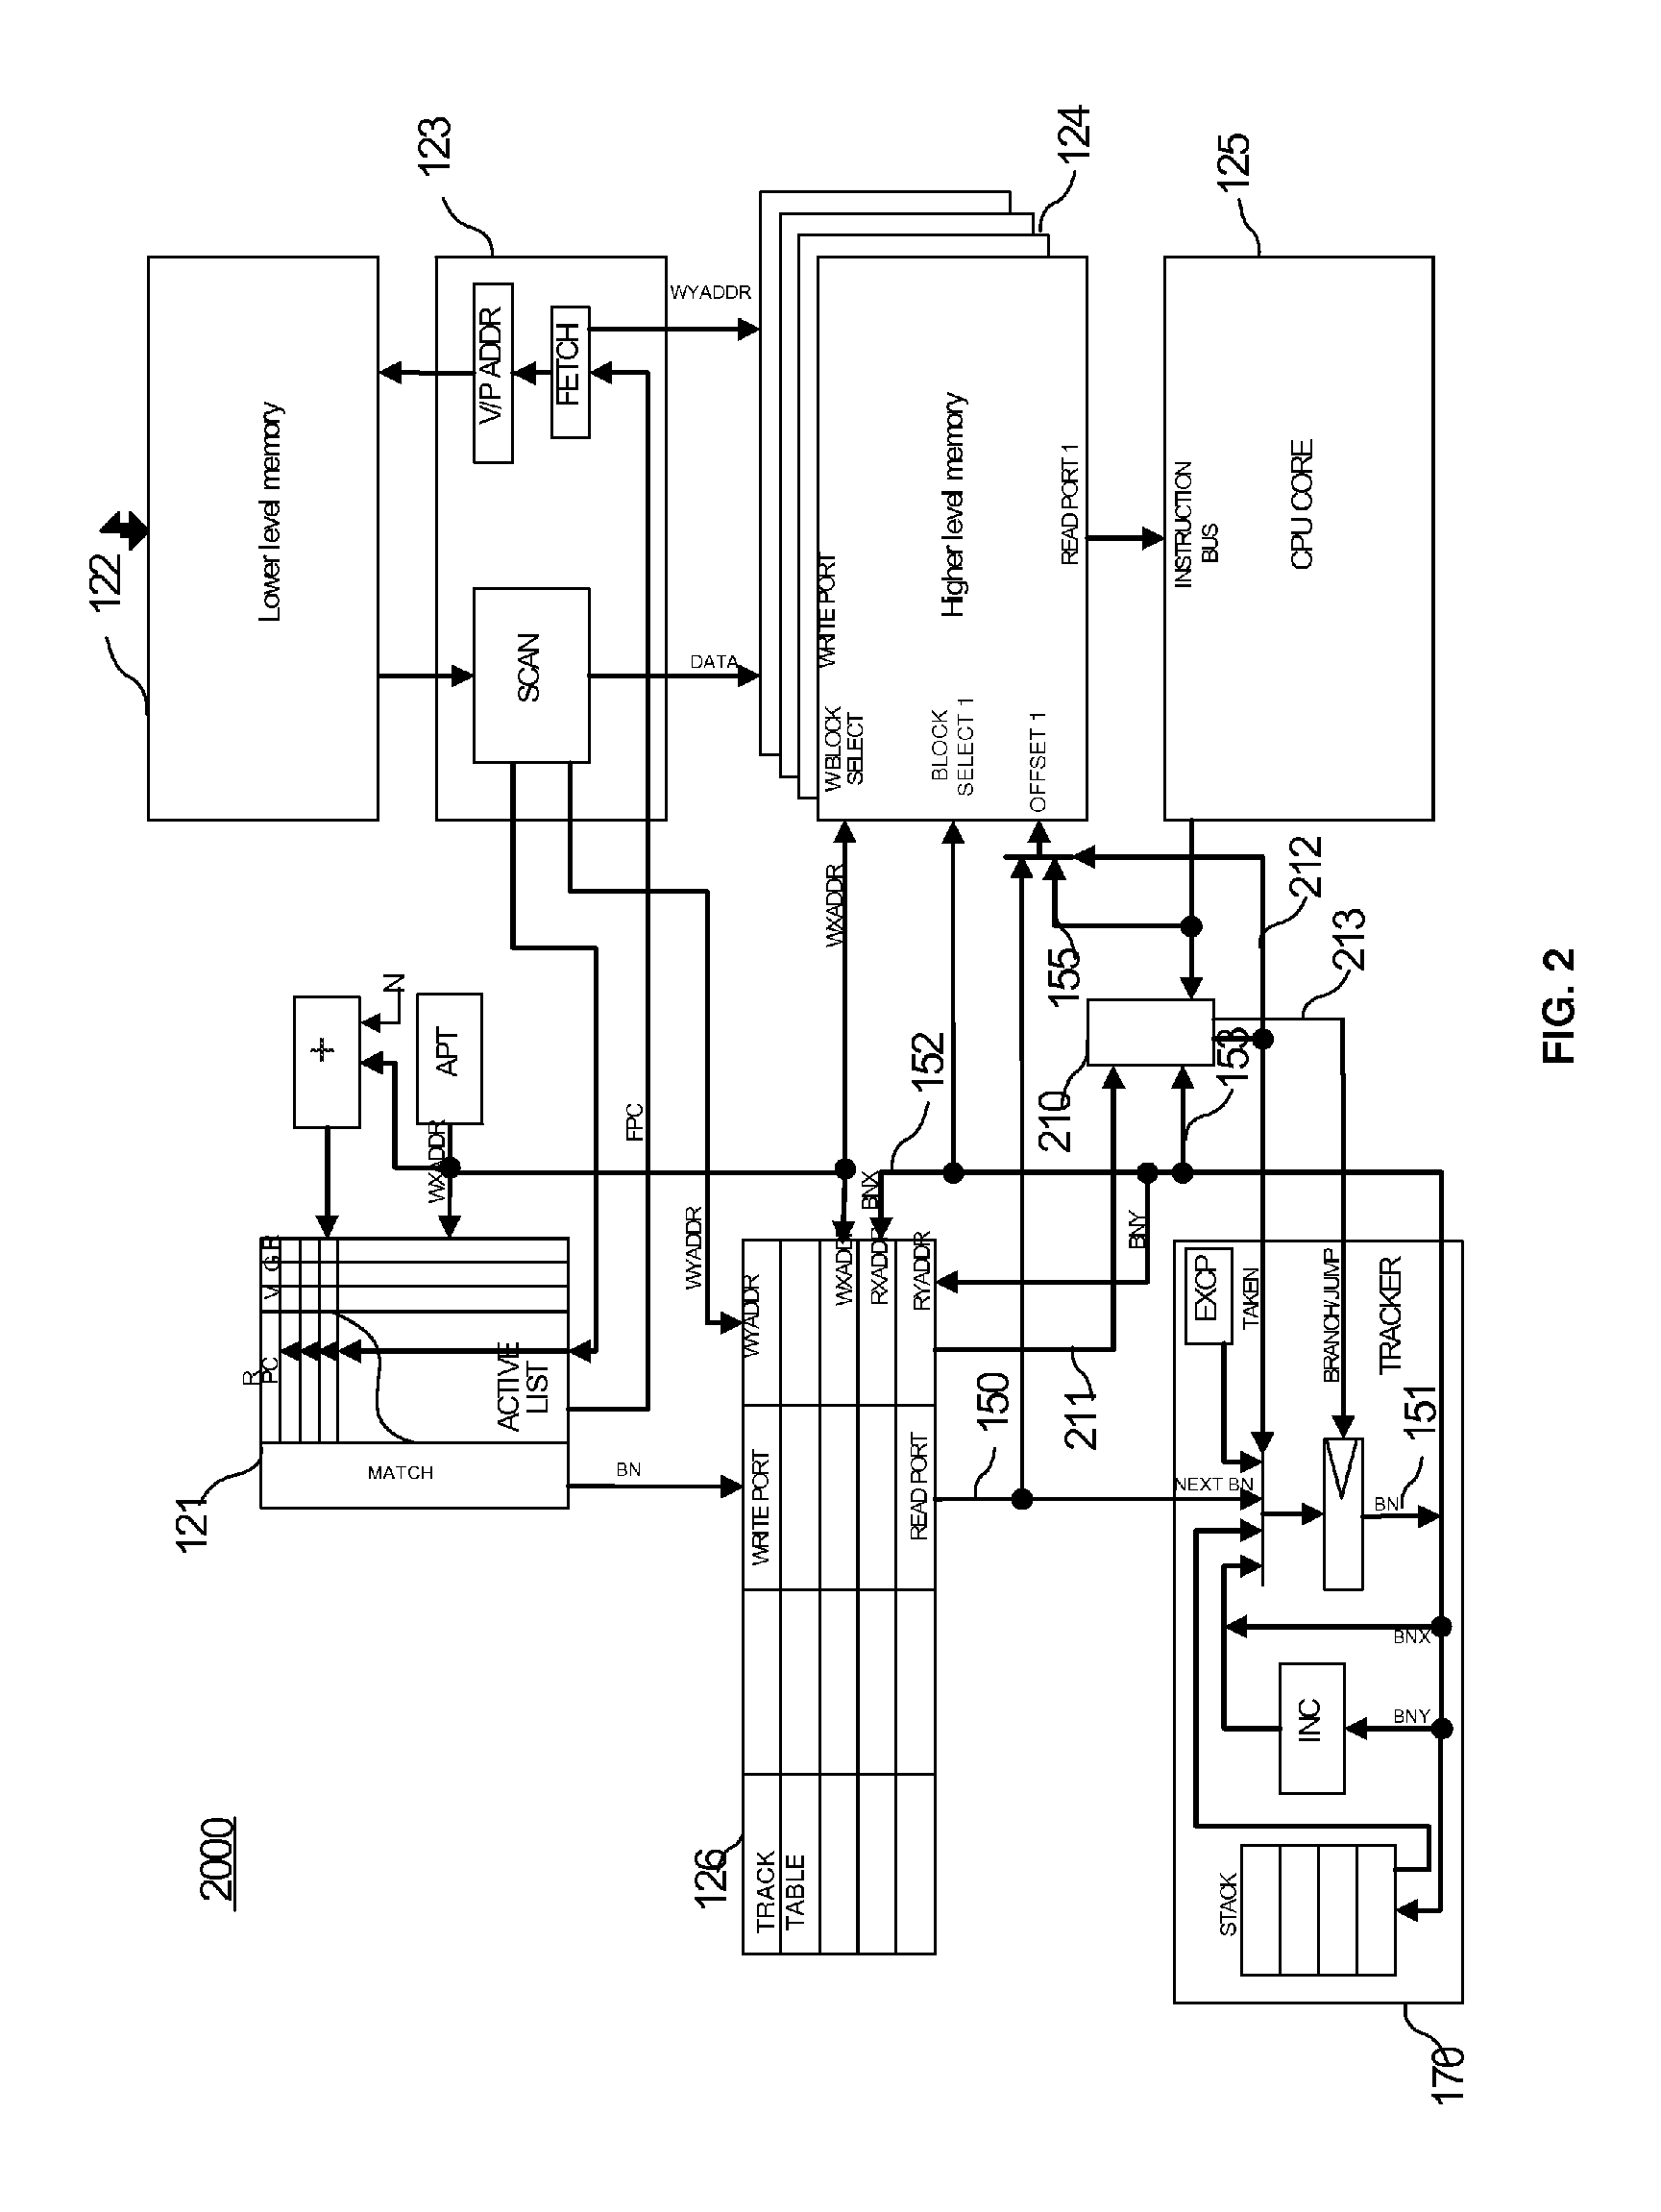 Low-miss-rate and low-miss-penalty cache system and method